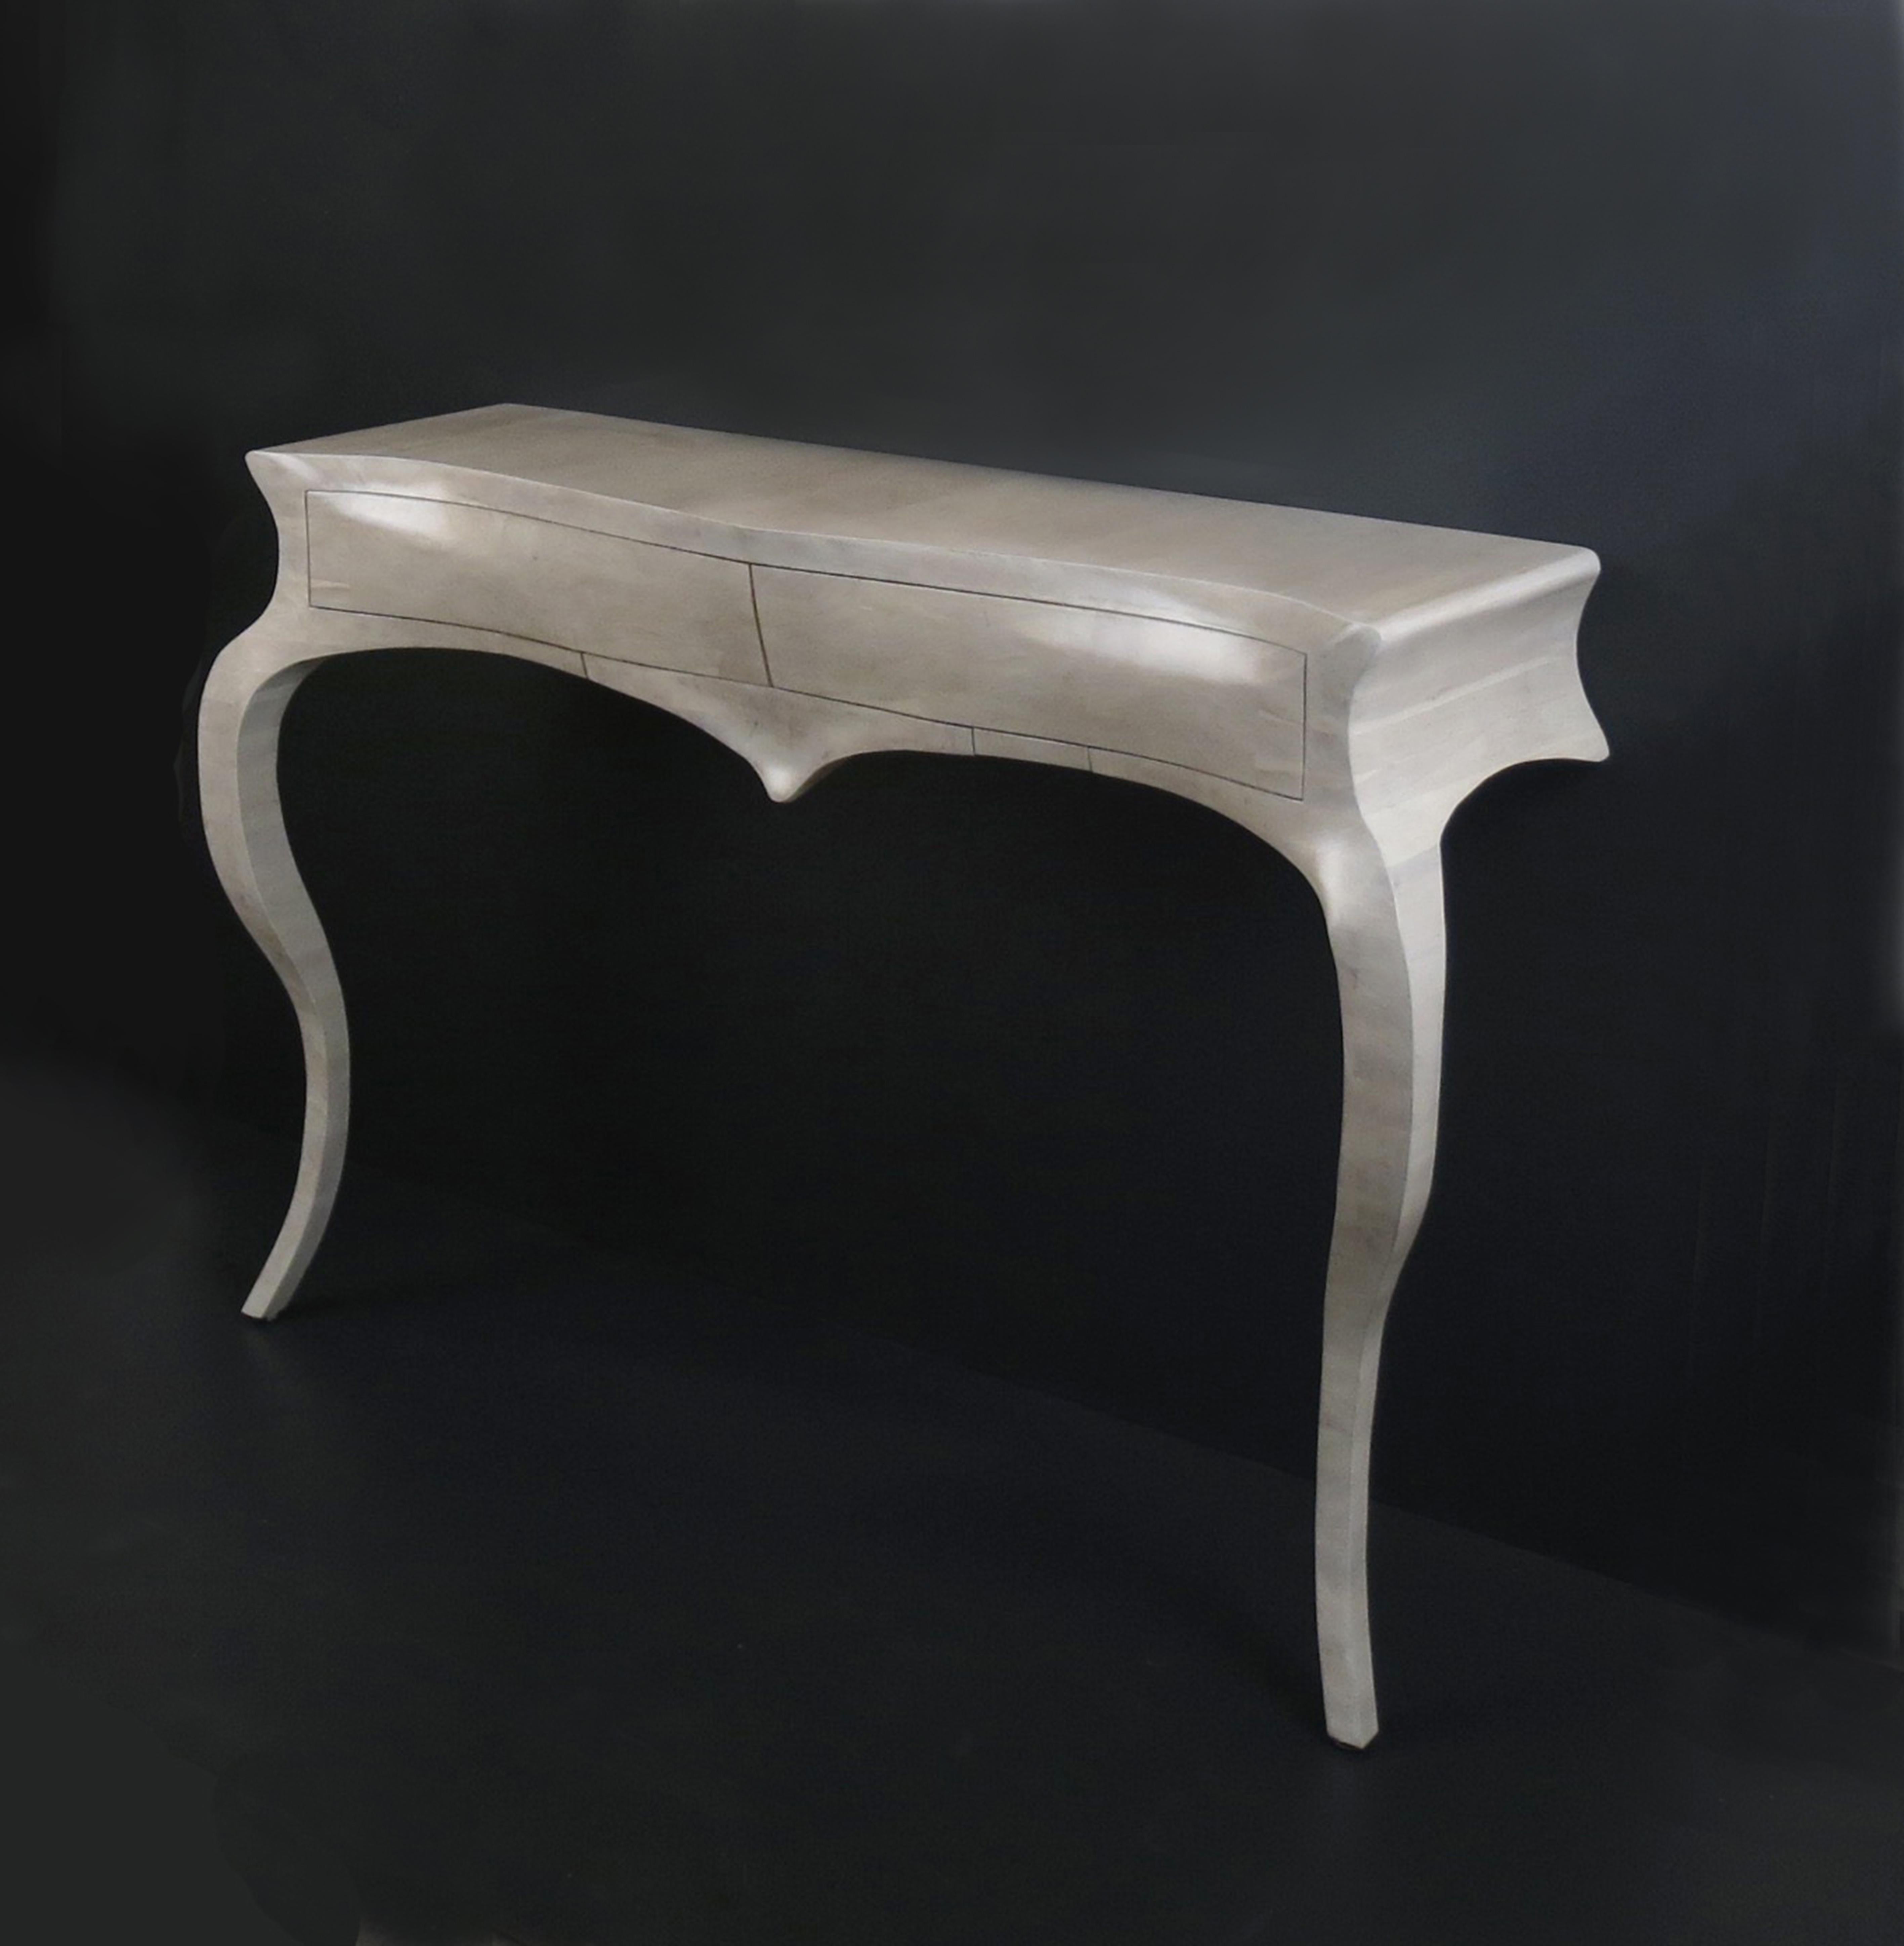 American LXV Console Table by Aaron Scott